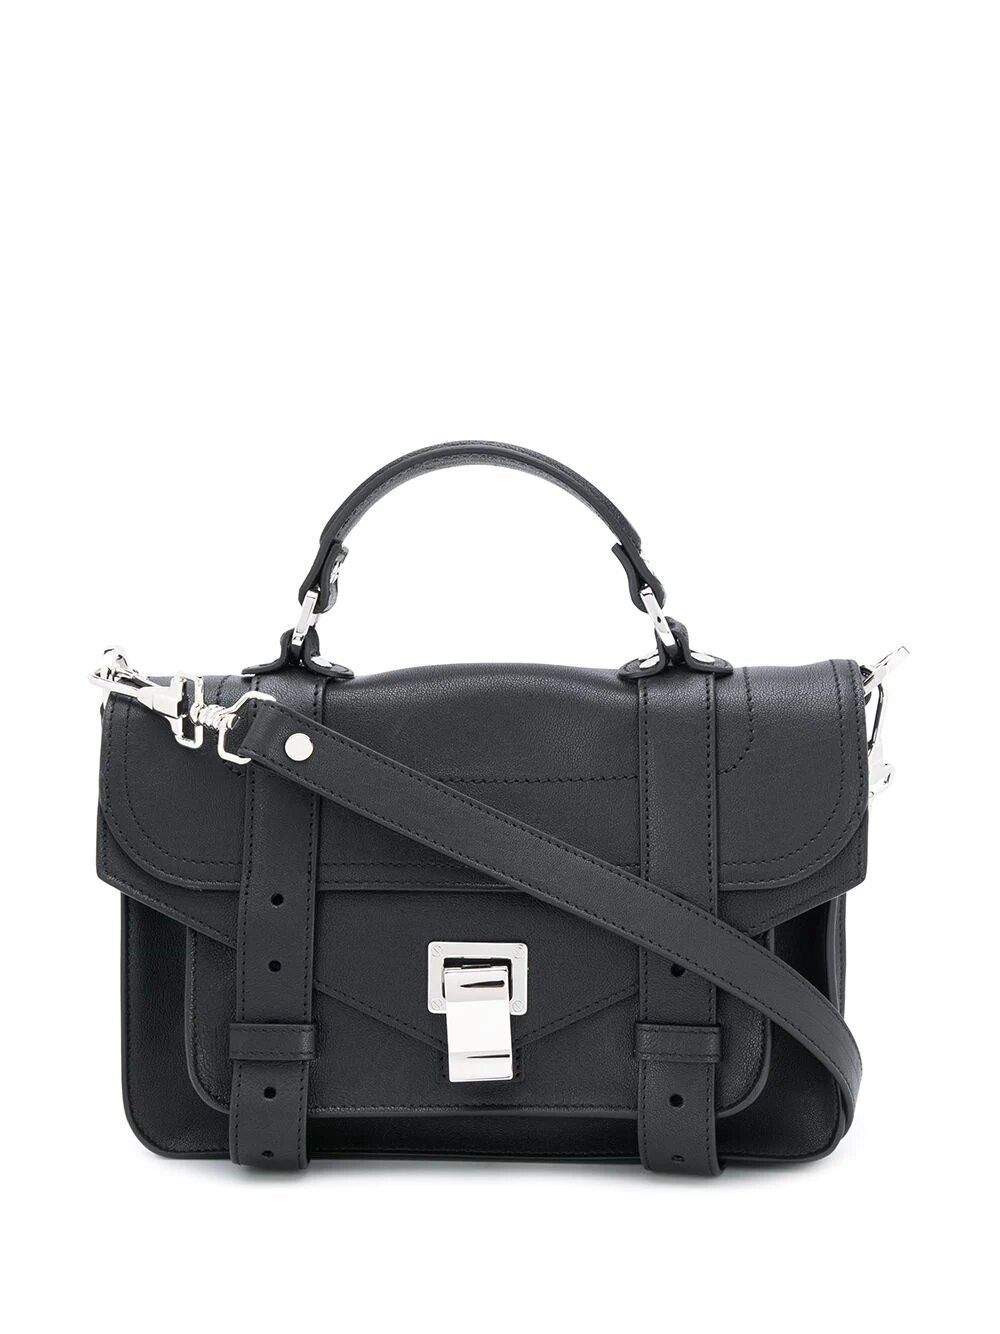 PROENZA SCHOULER PS1 TINY LUX LEATHER